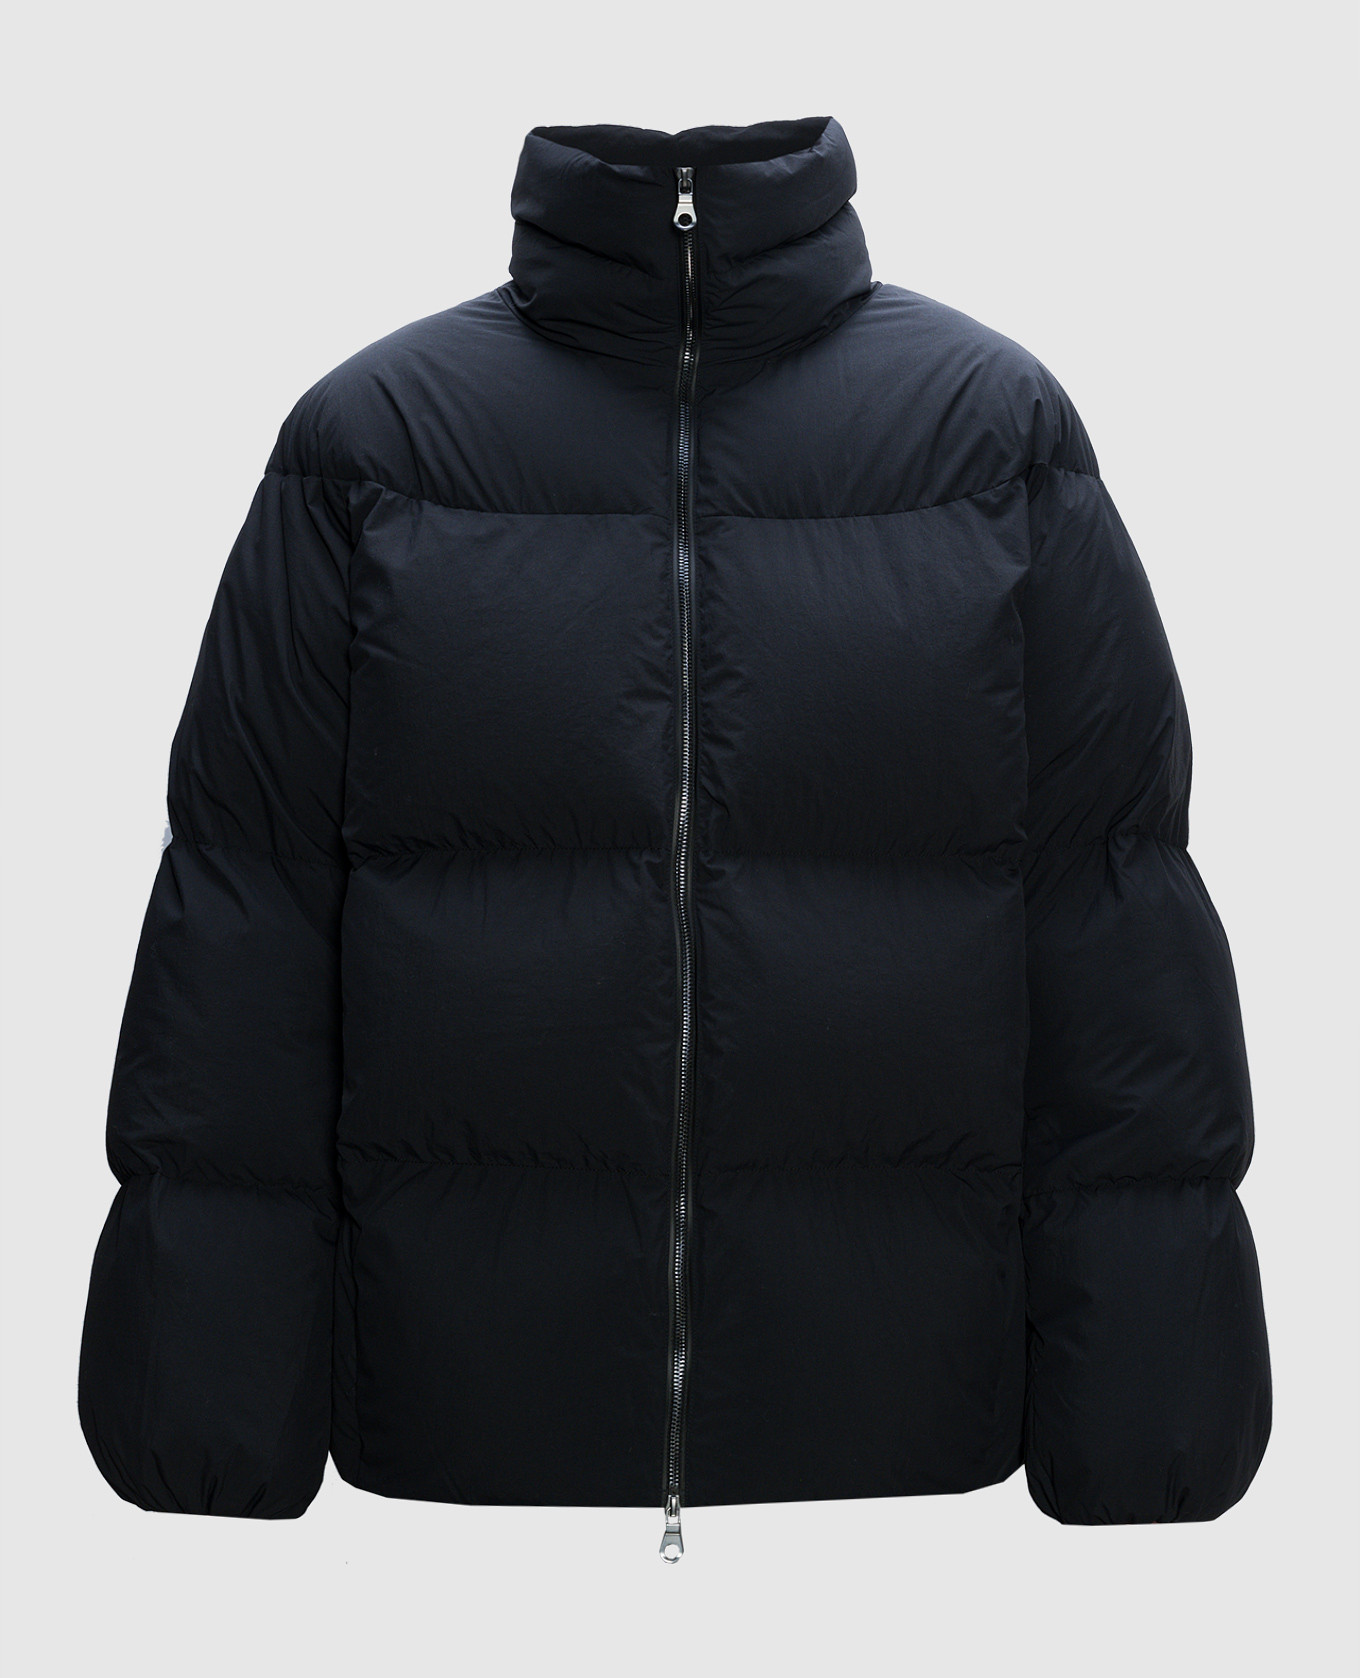 Oject black quilted jacket